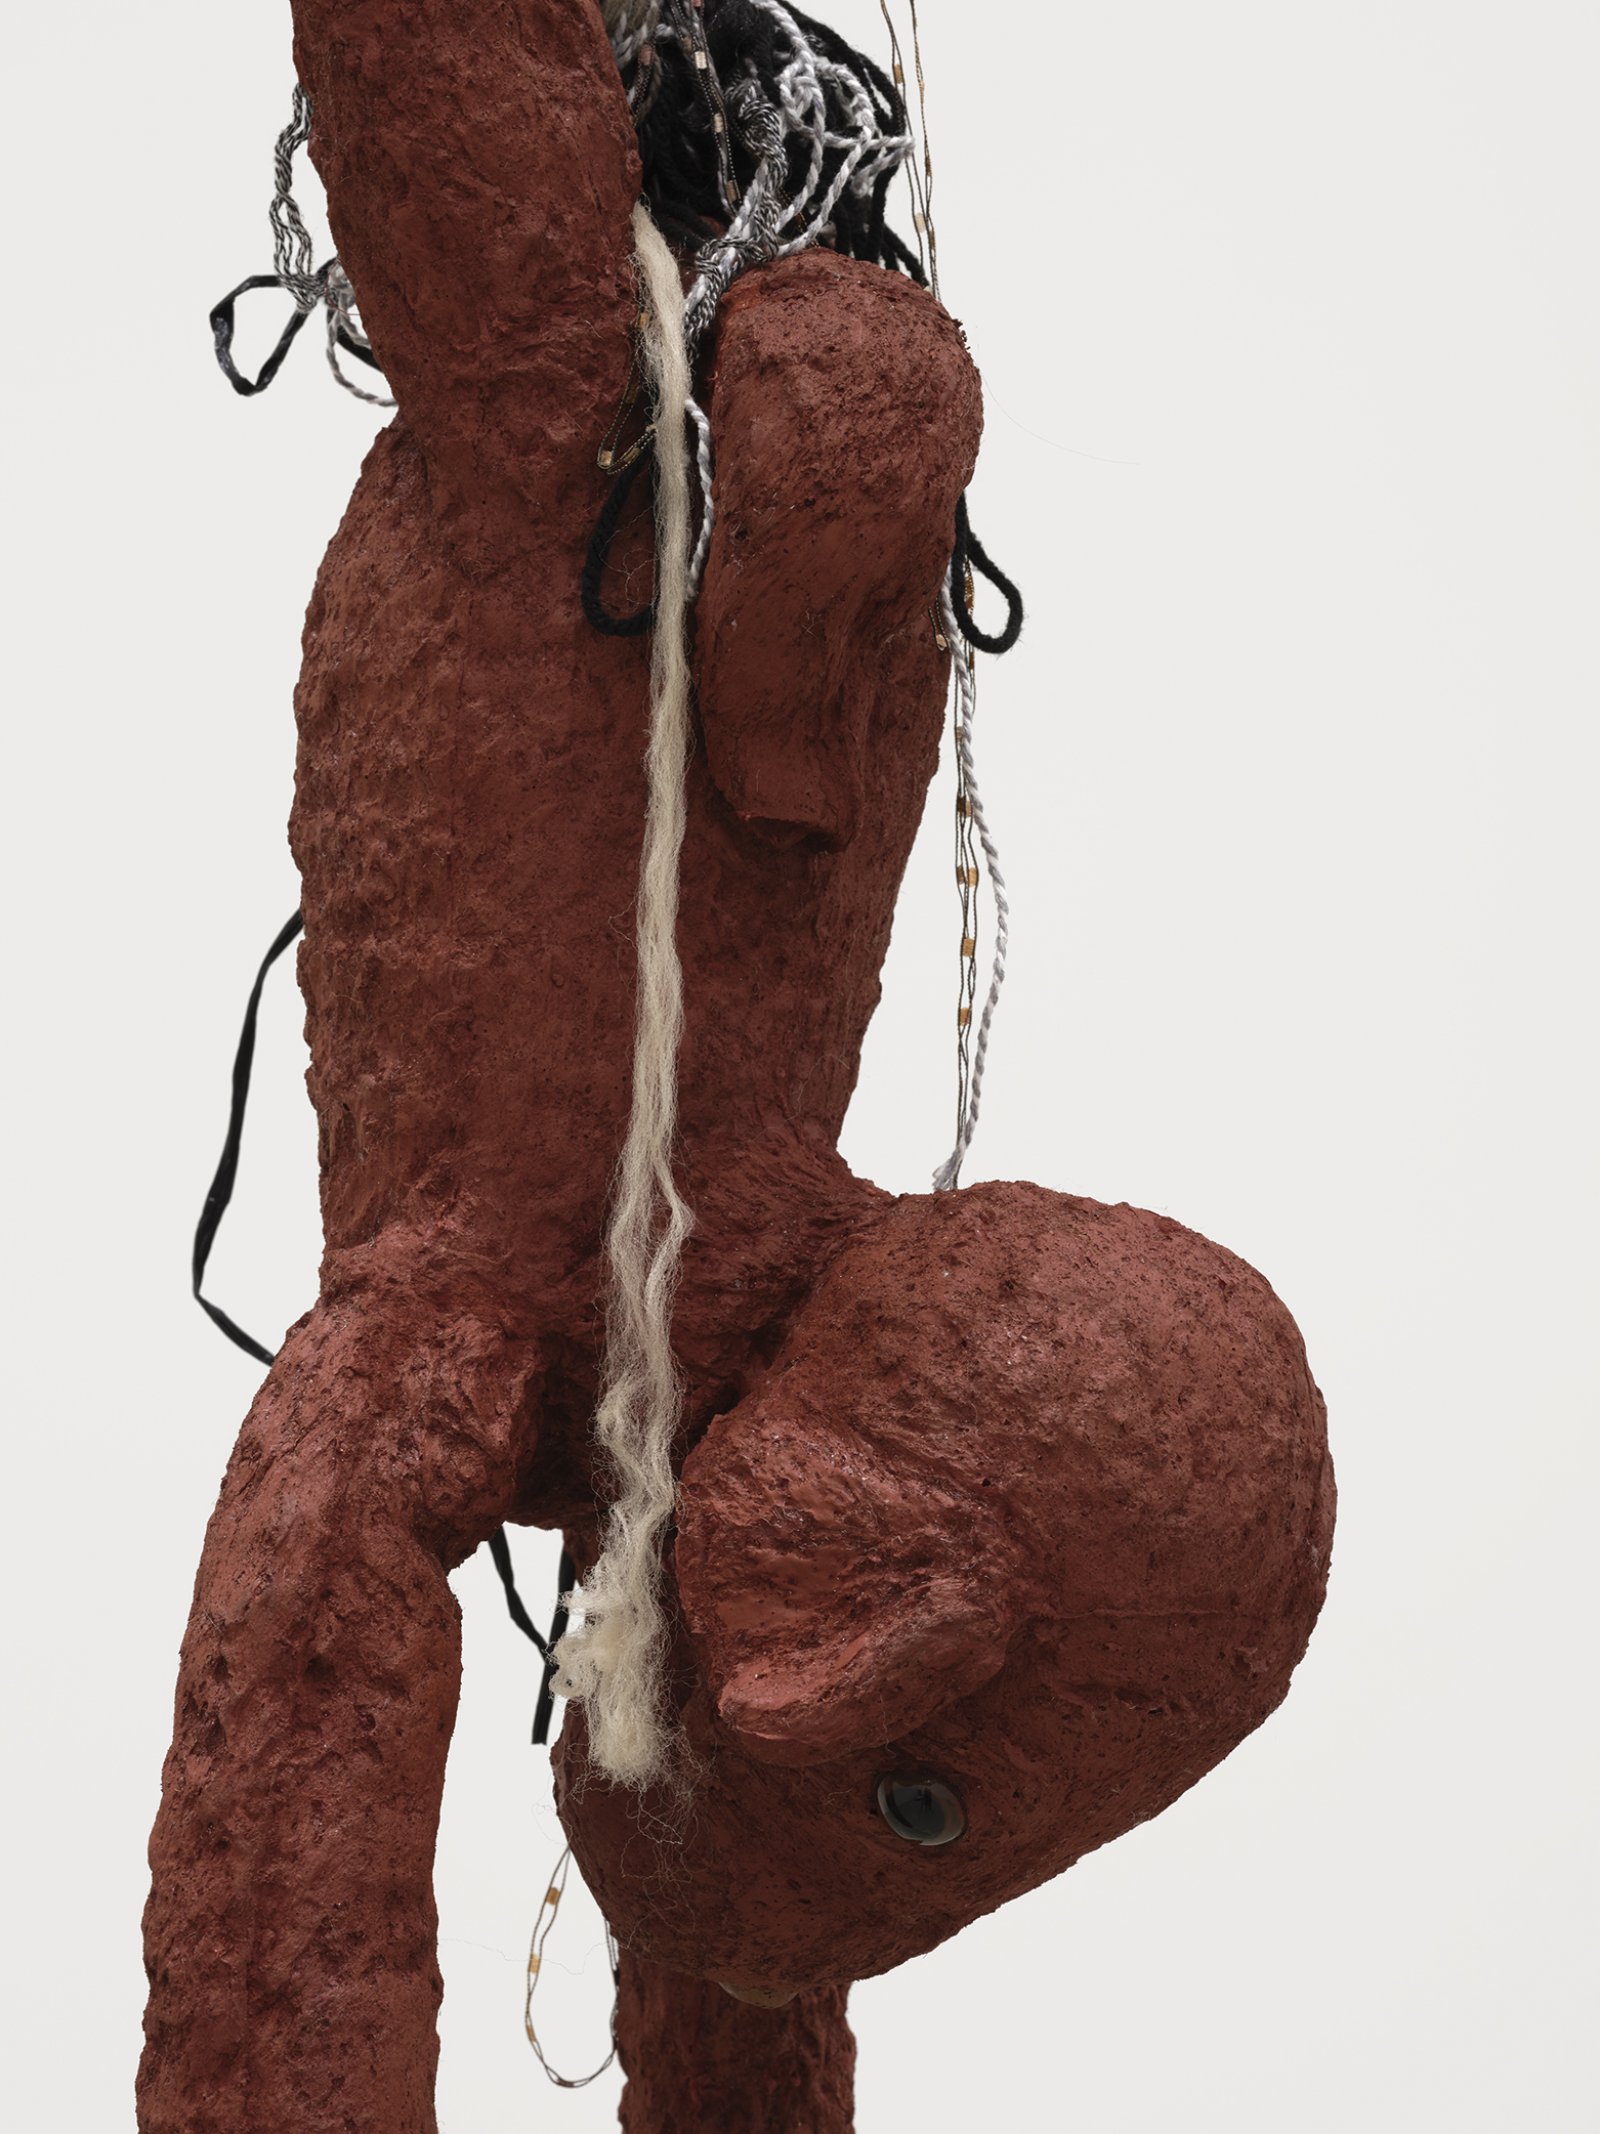 ​​Liz Magor, Delivery (red) (detail), 2018, silicone rubber, textiles, twine, 325 x 26 x 23 in. (826 x 66 x 58 cm)​ by Liz Magor